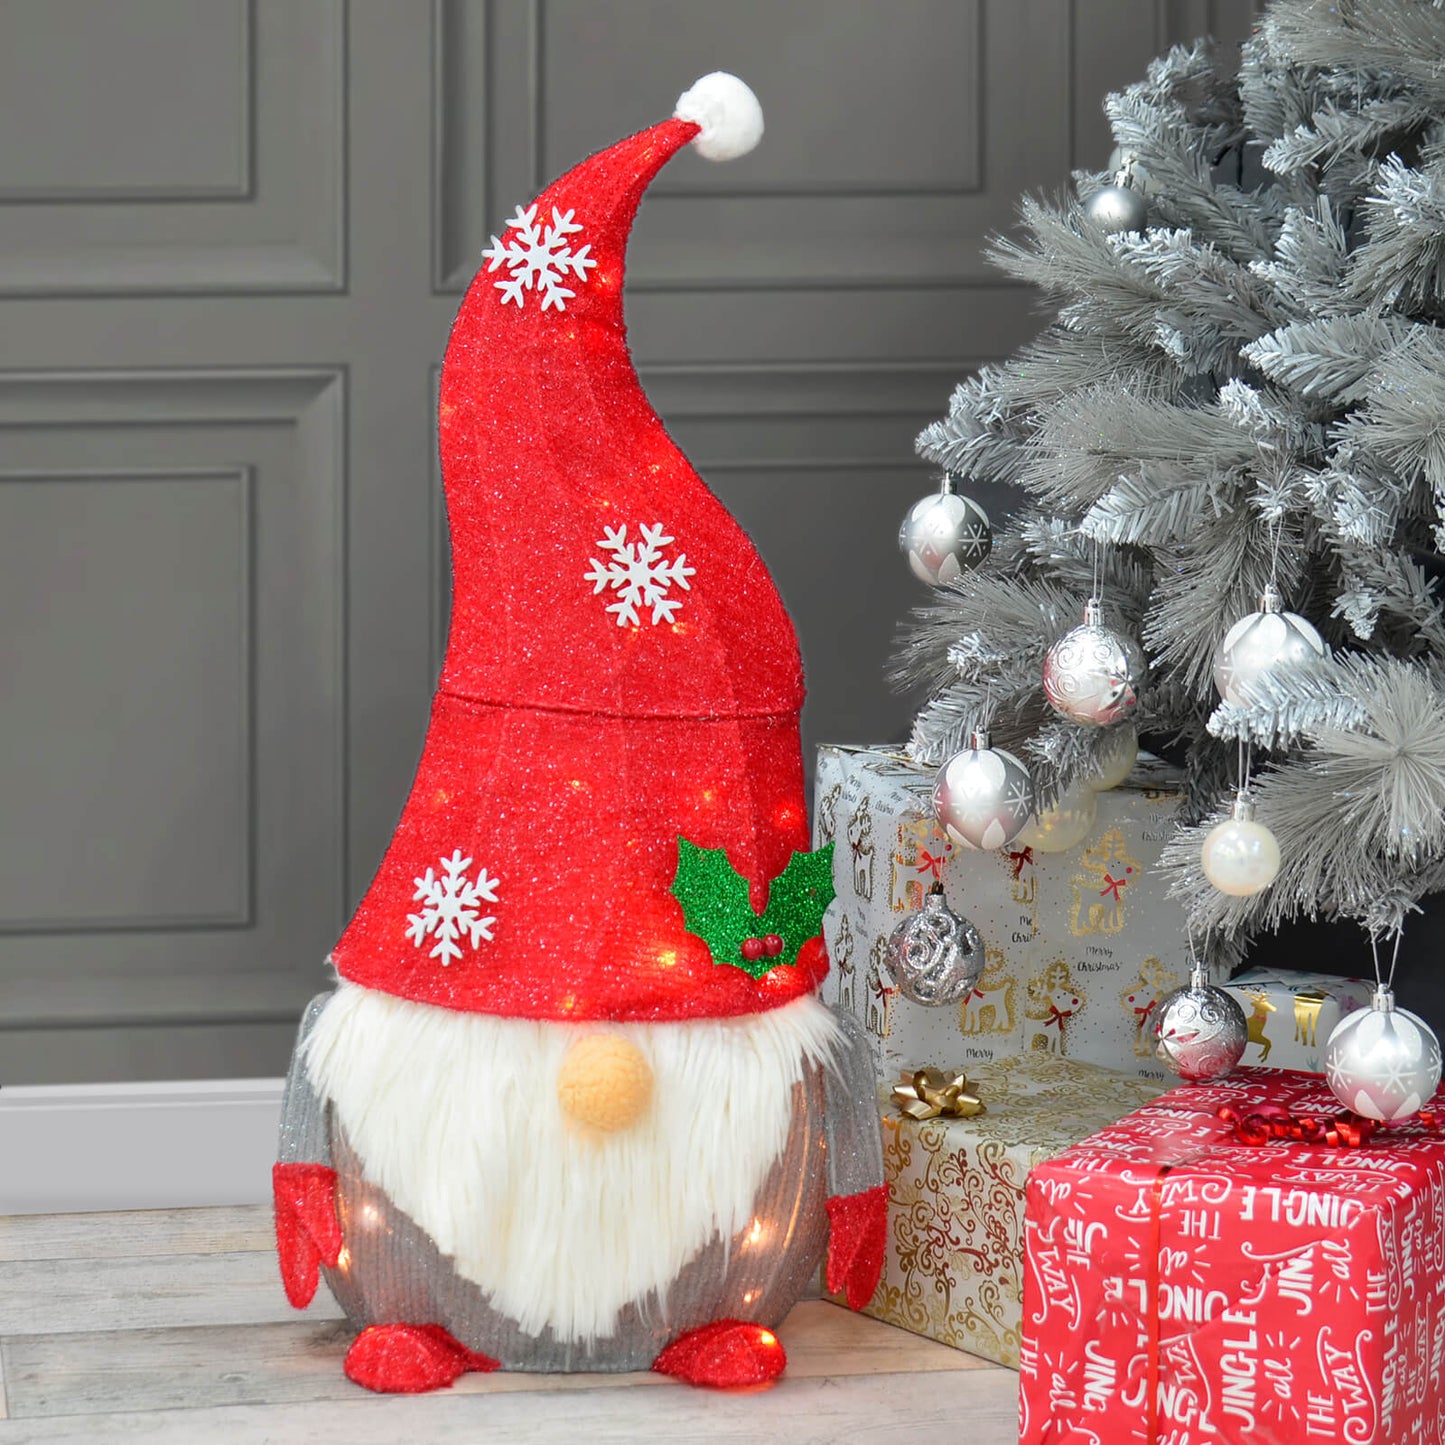 Light up Christmas gnome with snowflake red glitter hat and holly leaves sitting beside a silver Christmas tree and presents